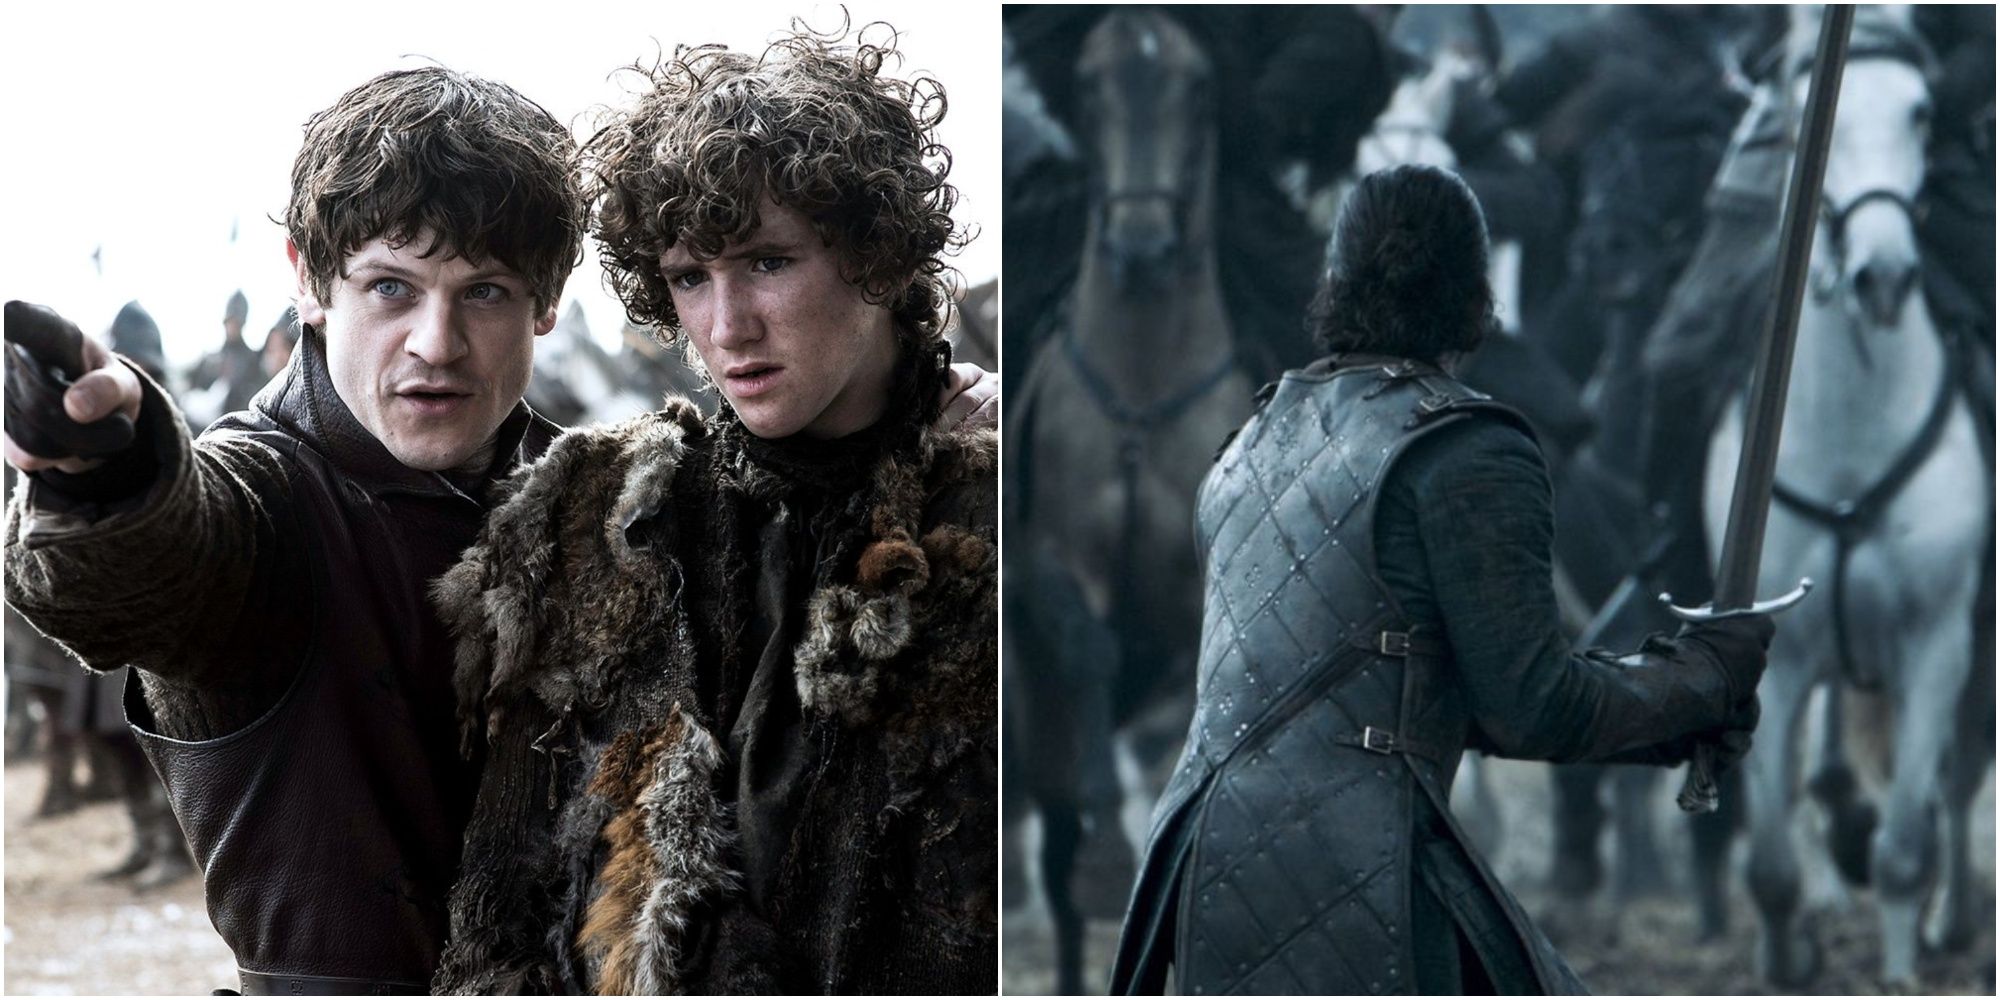 Split image of Ramsay Bolton Rickon Stark and Jon Snow from Battle of the Bastards in Game of Thrones.